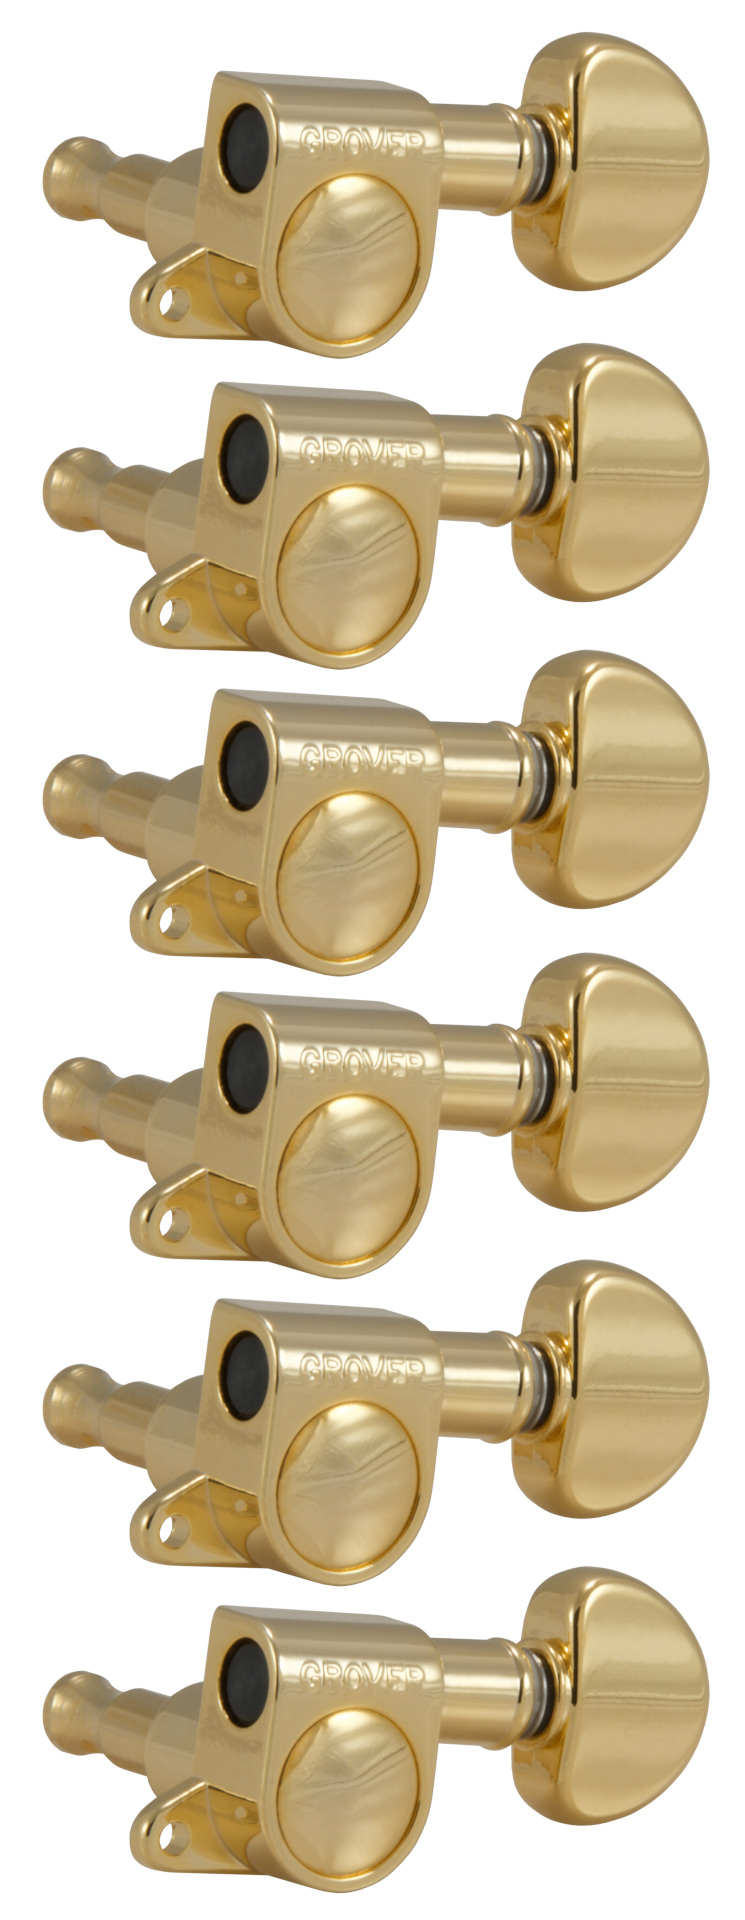 Grover 205G6 Mini Rotomatics with Round Button - Guitar Machine Heads, 6-in-Line, Bass Side (Left) - Gold